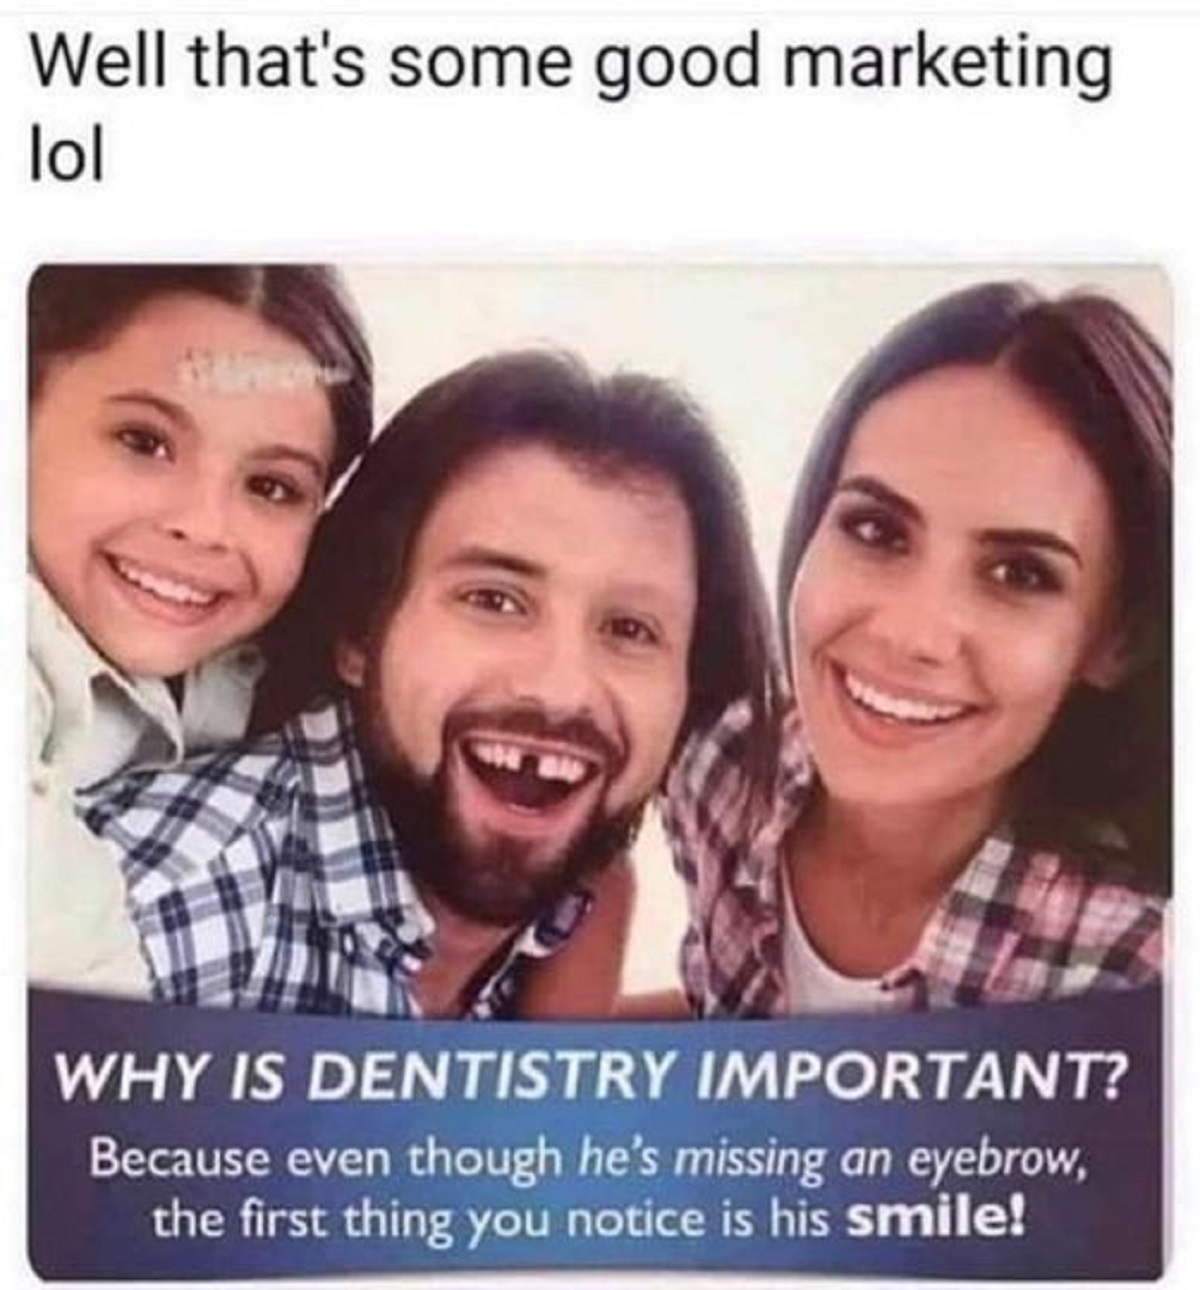 good marketing dentist meme - Well that's some good marketing lol Why Is Dentistry Important? Because even though he's missing an eyebrow, the first thing you notice is his smile!